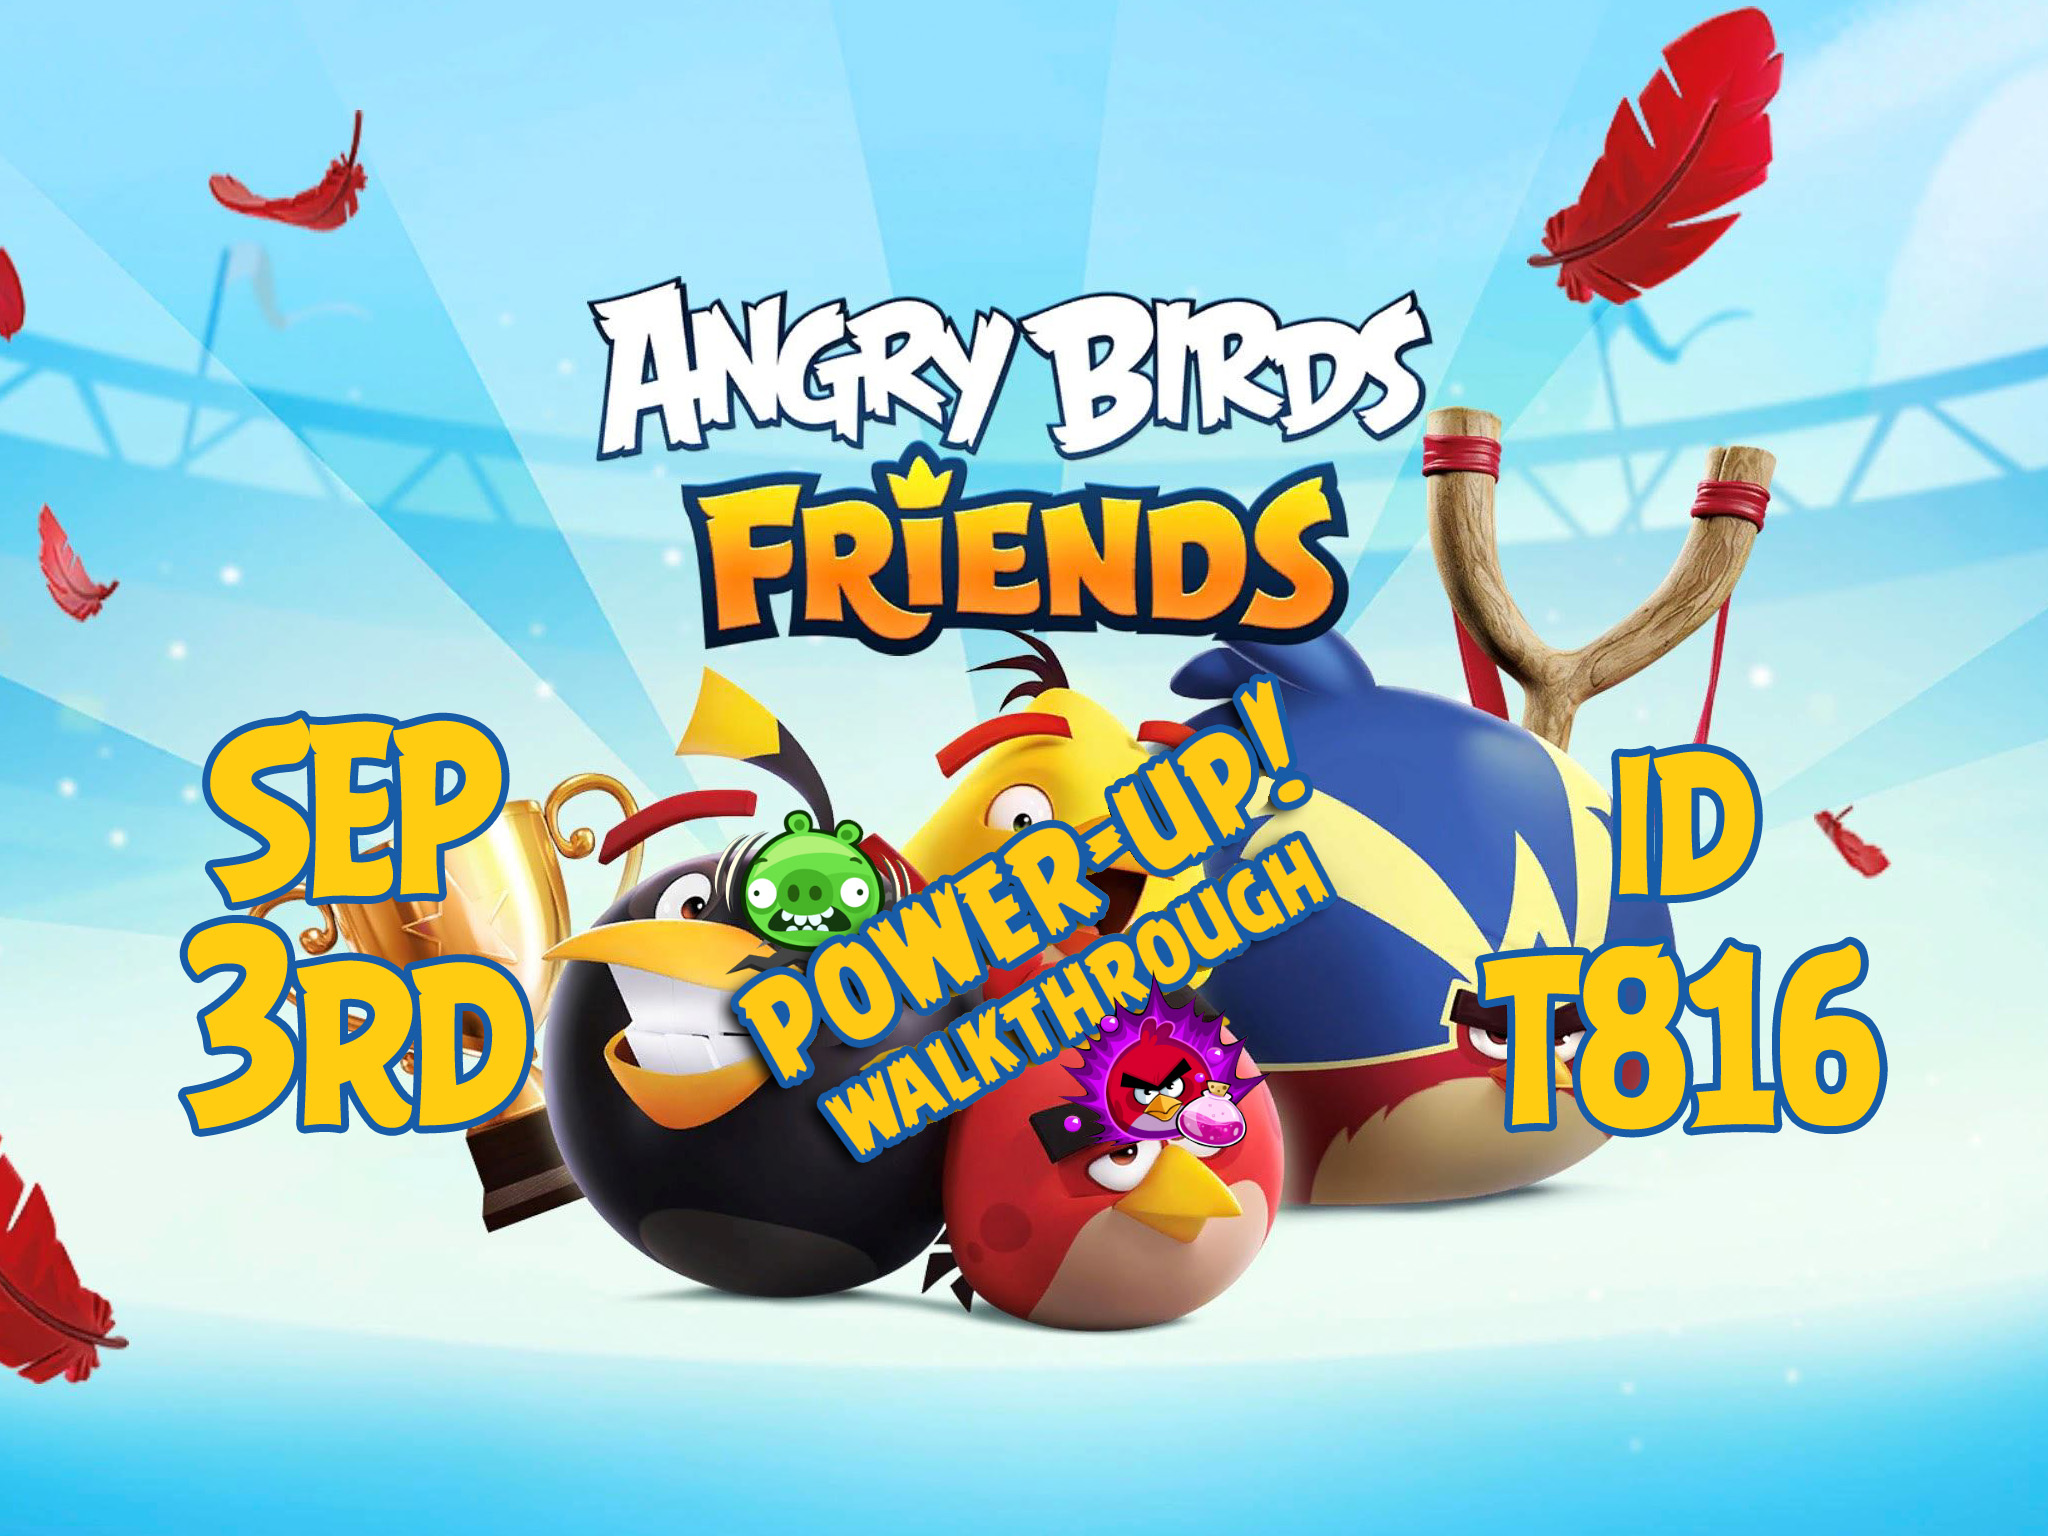 Angry-Birds-Friends-Tournament-T816-Feature-Image-PU